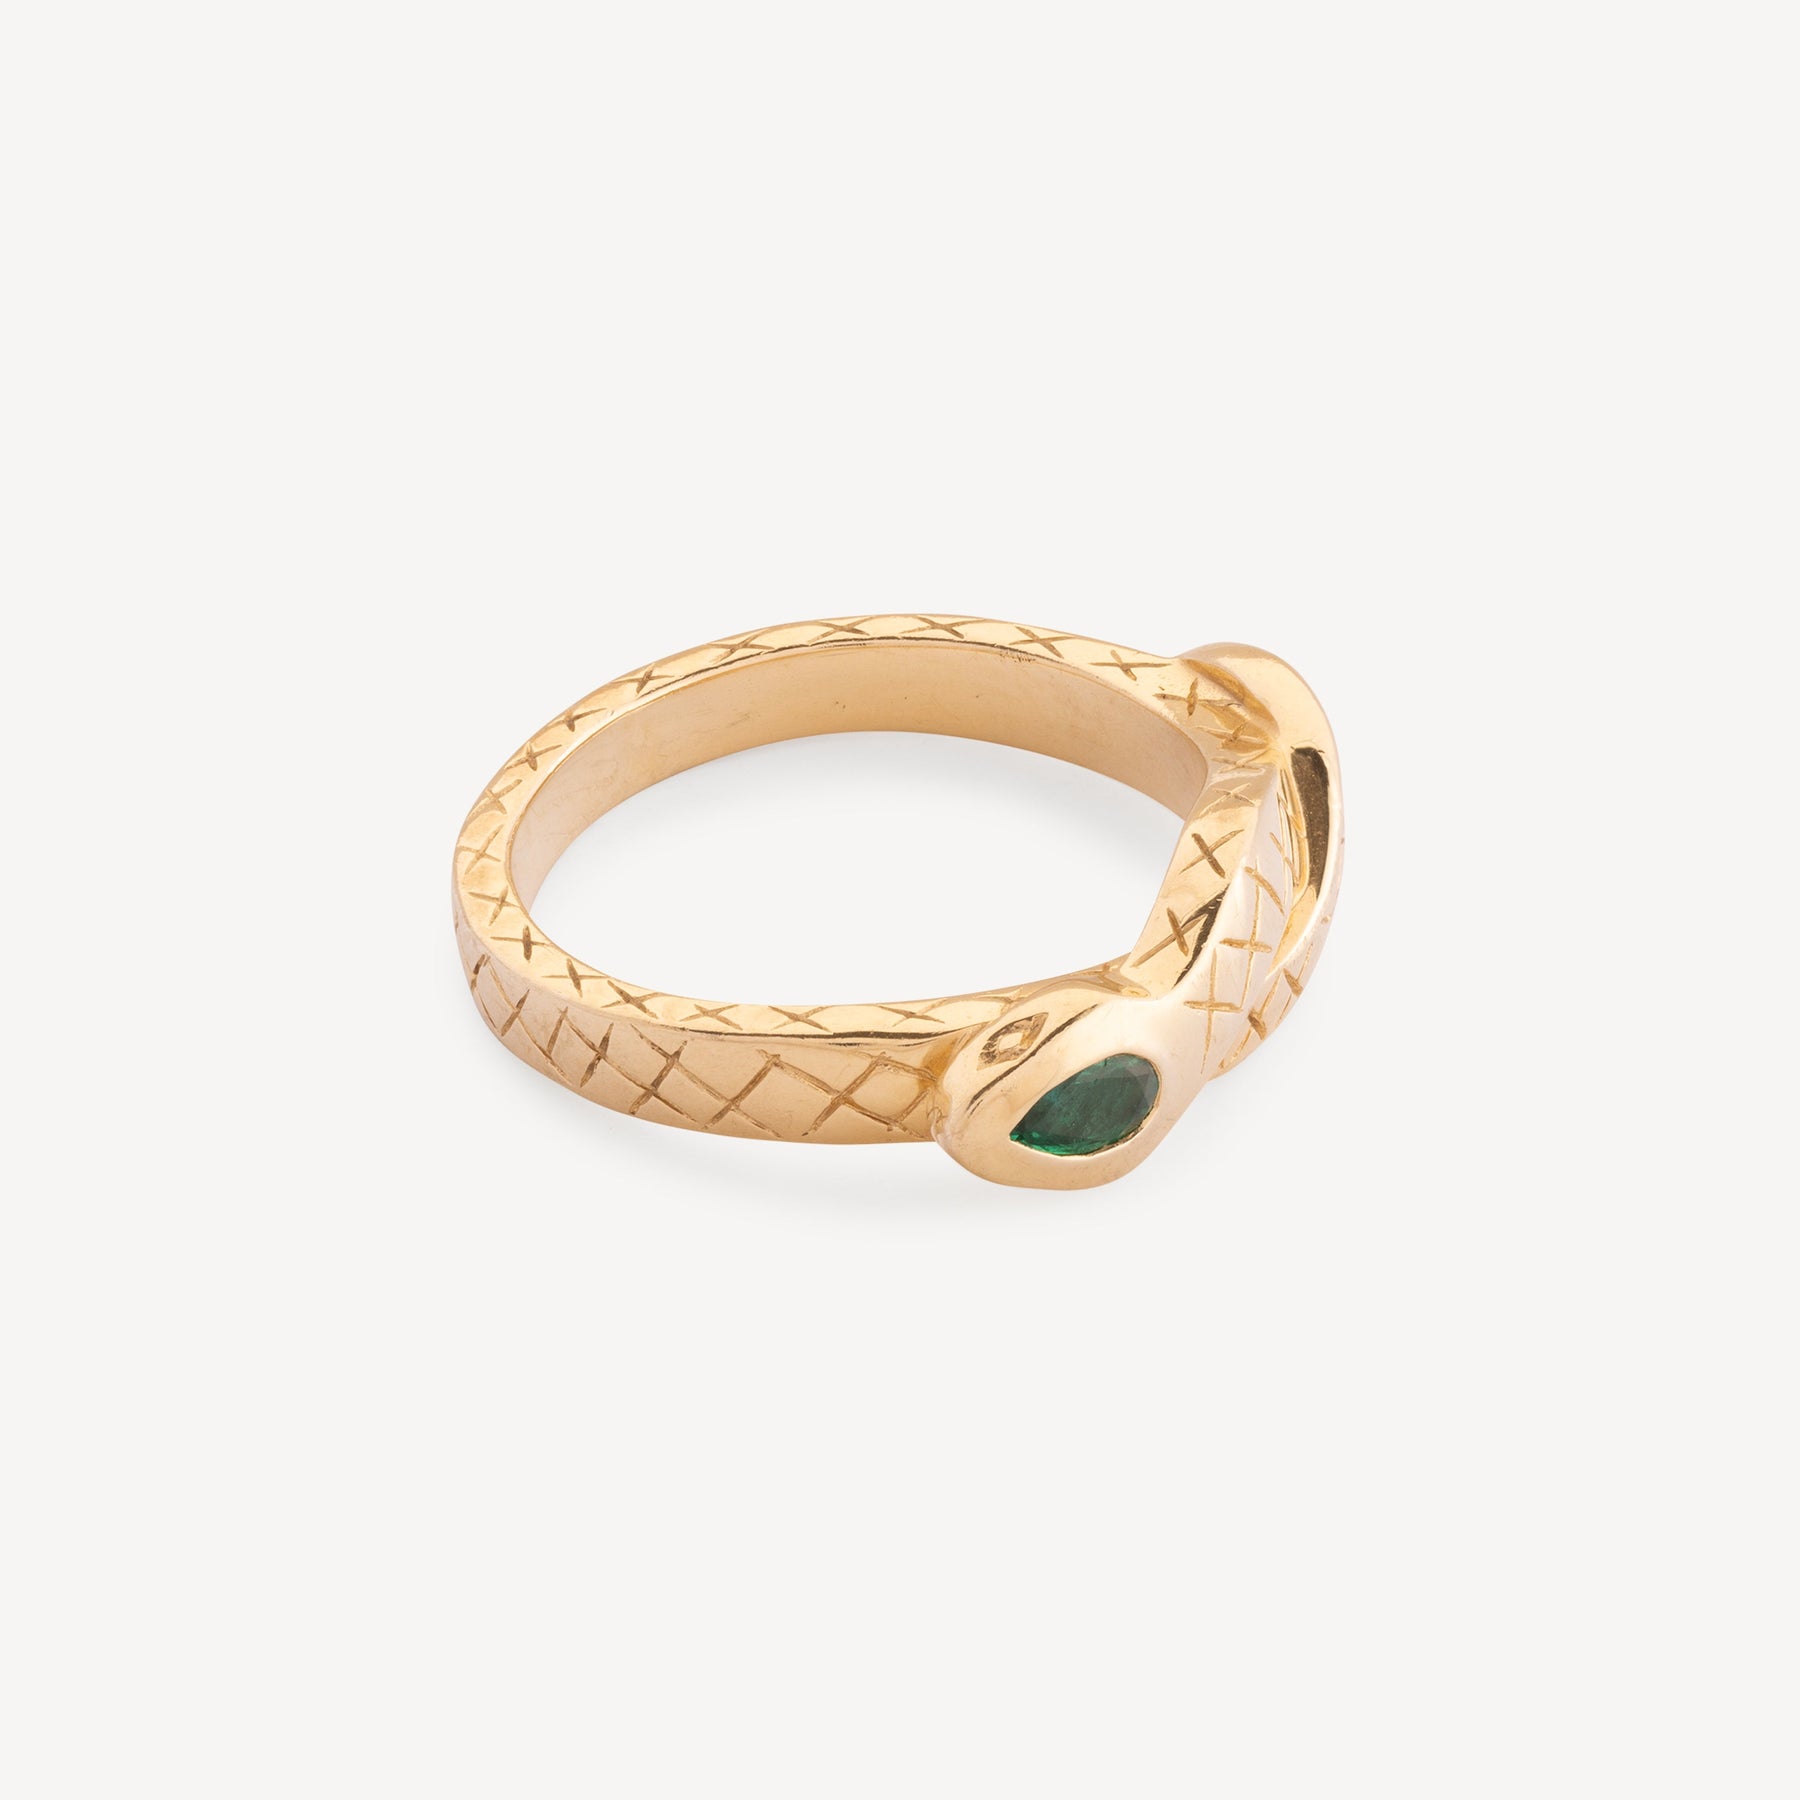 Sophia Serpent Ring with Pear Emerald